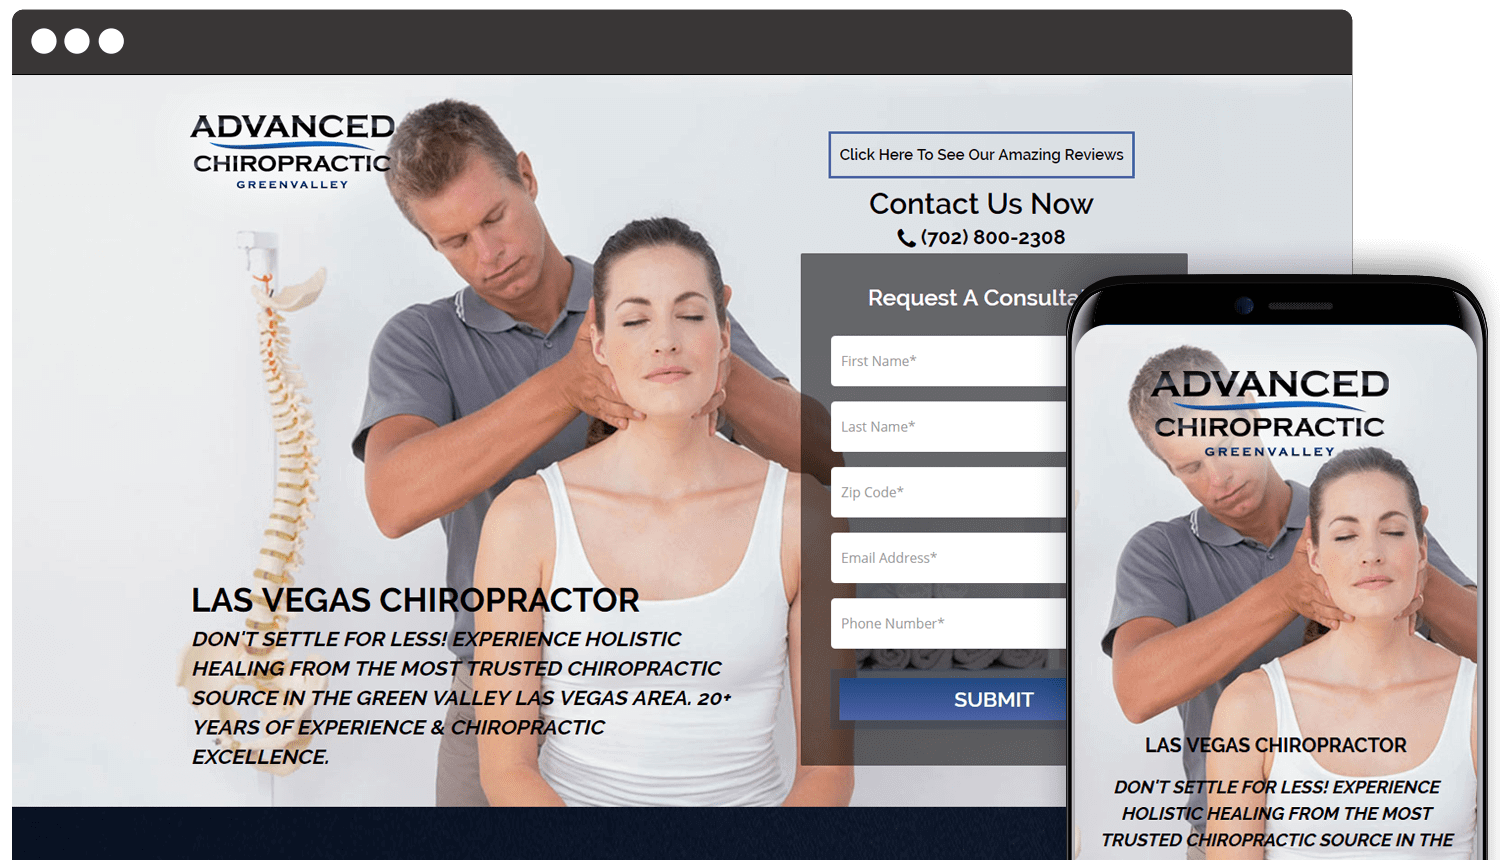 Chiropractic Care Landing Page Showcase